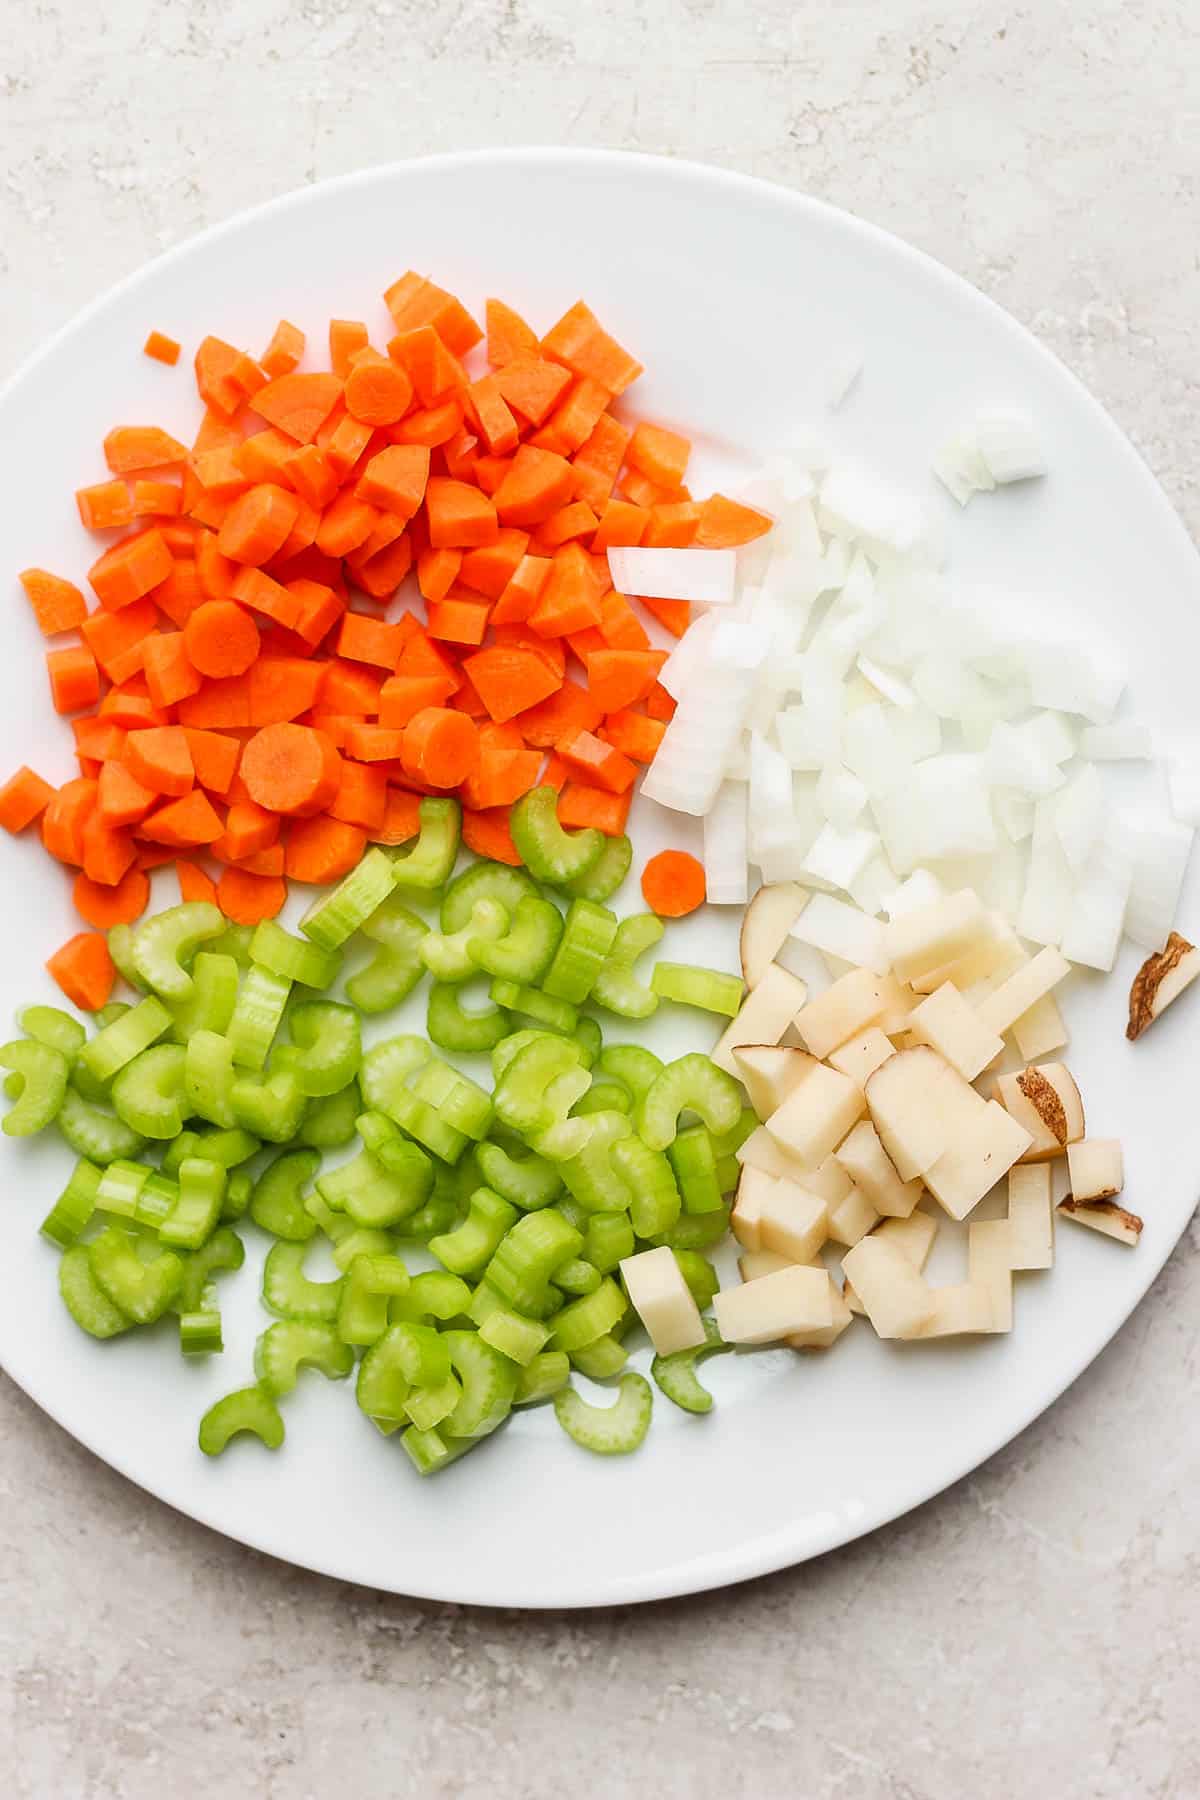 Chopped vegetables on a large plate.